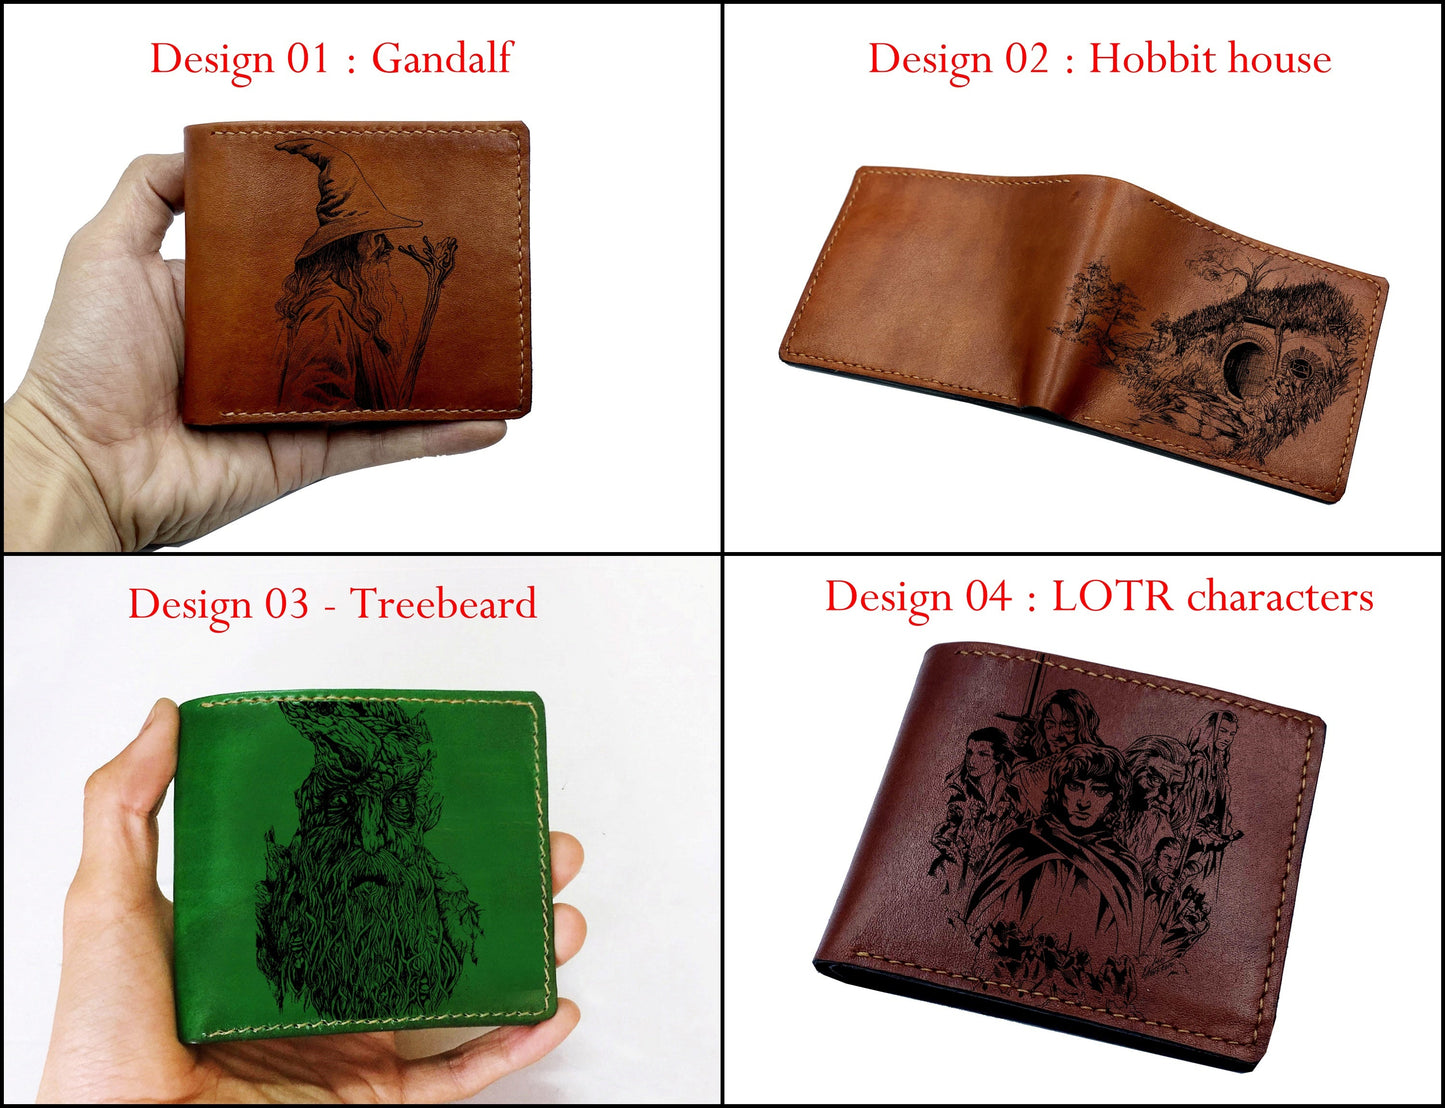 Mayan Corner - The Lord of the Rings leather handmade wallet, The hobbit house drawing wallet, the Shire countryside art wallet, leather gift for men